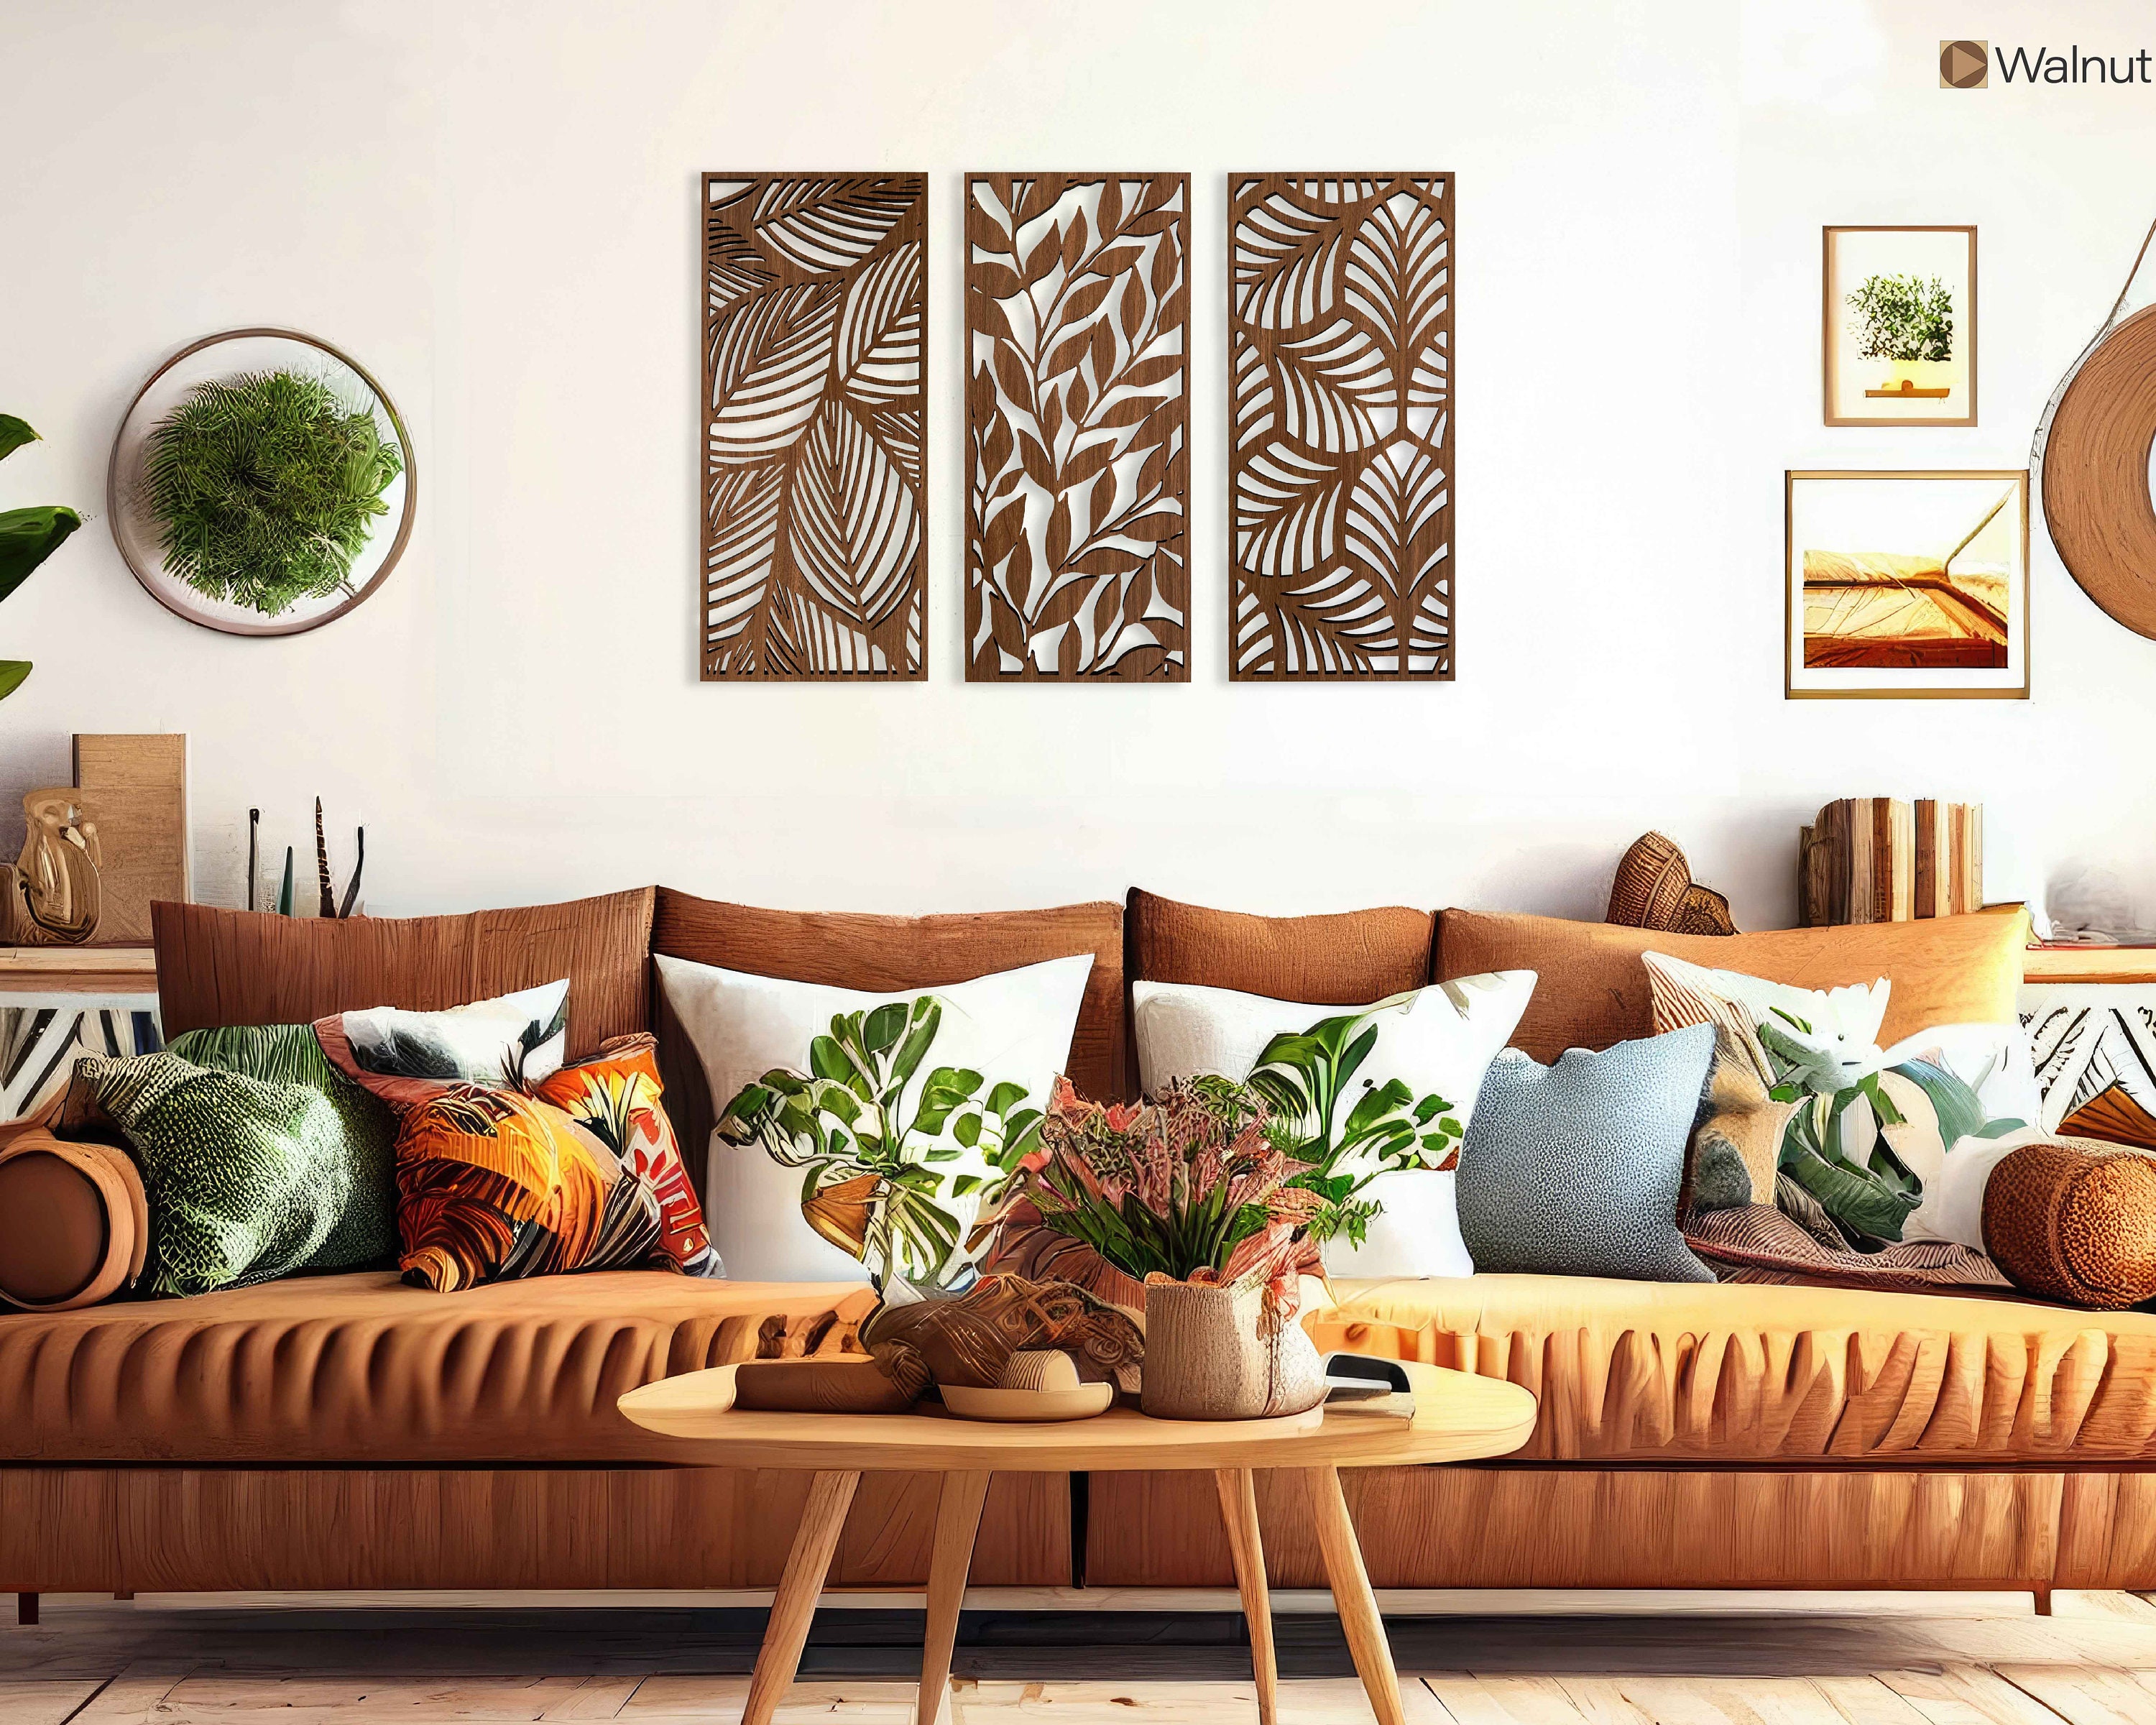 Set of 3 Large Wooden Wall Art Panels on Frames, Beautiful Living Room or  Bedroom Wall Decor, Leaves Theme -  Israel